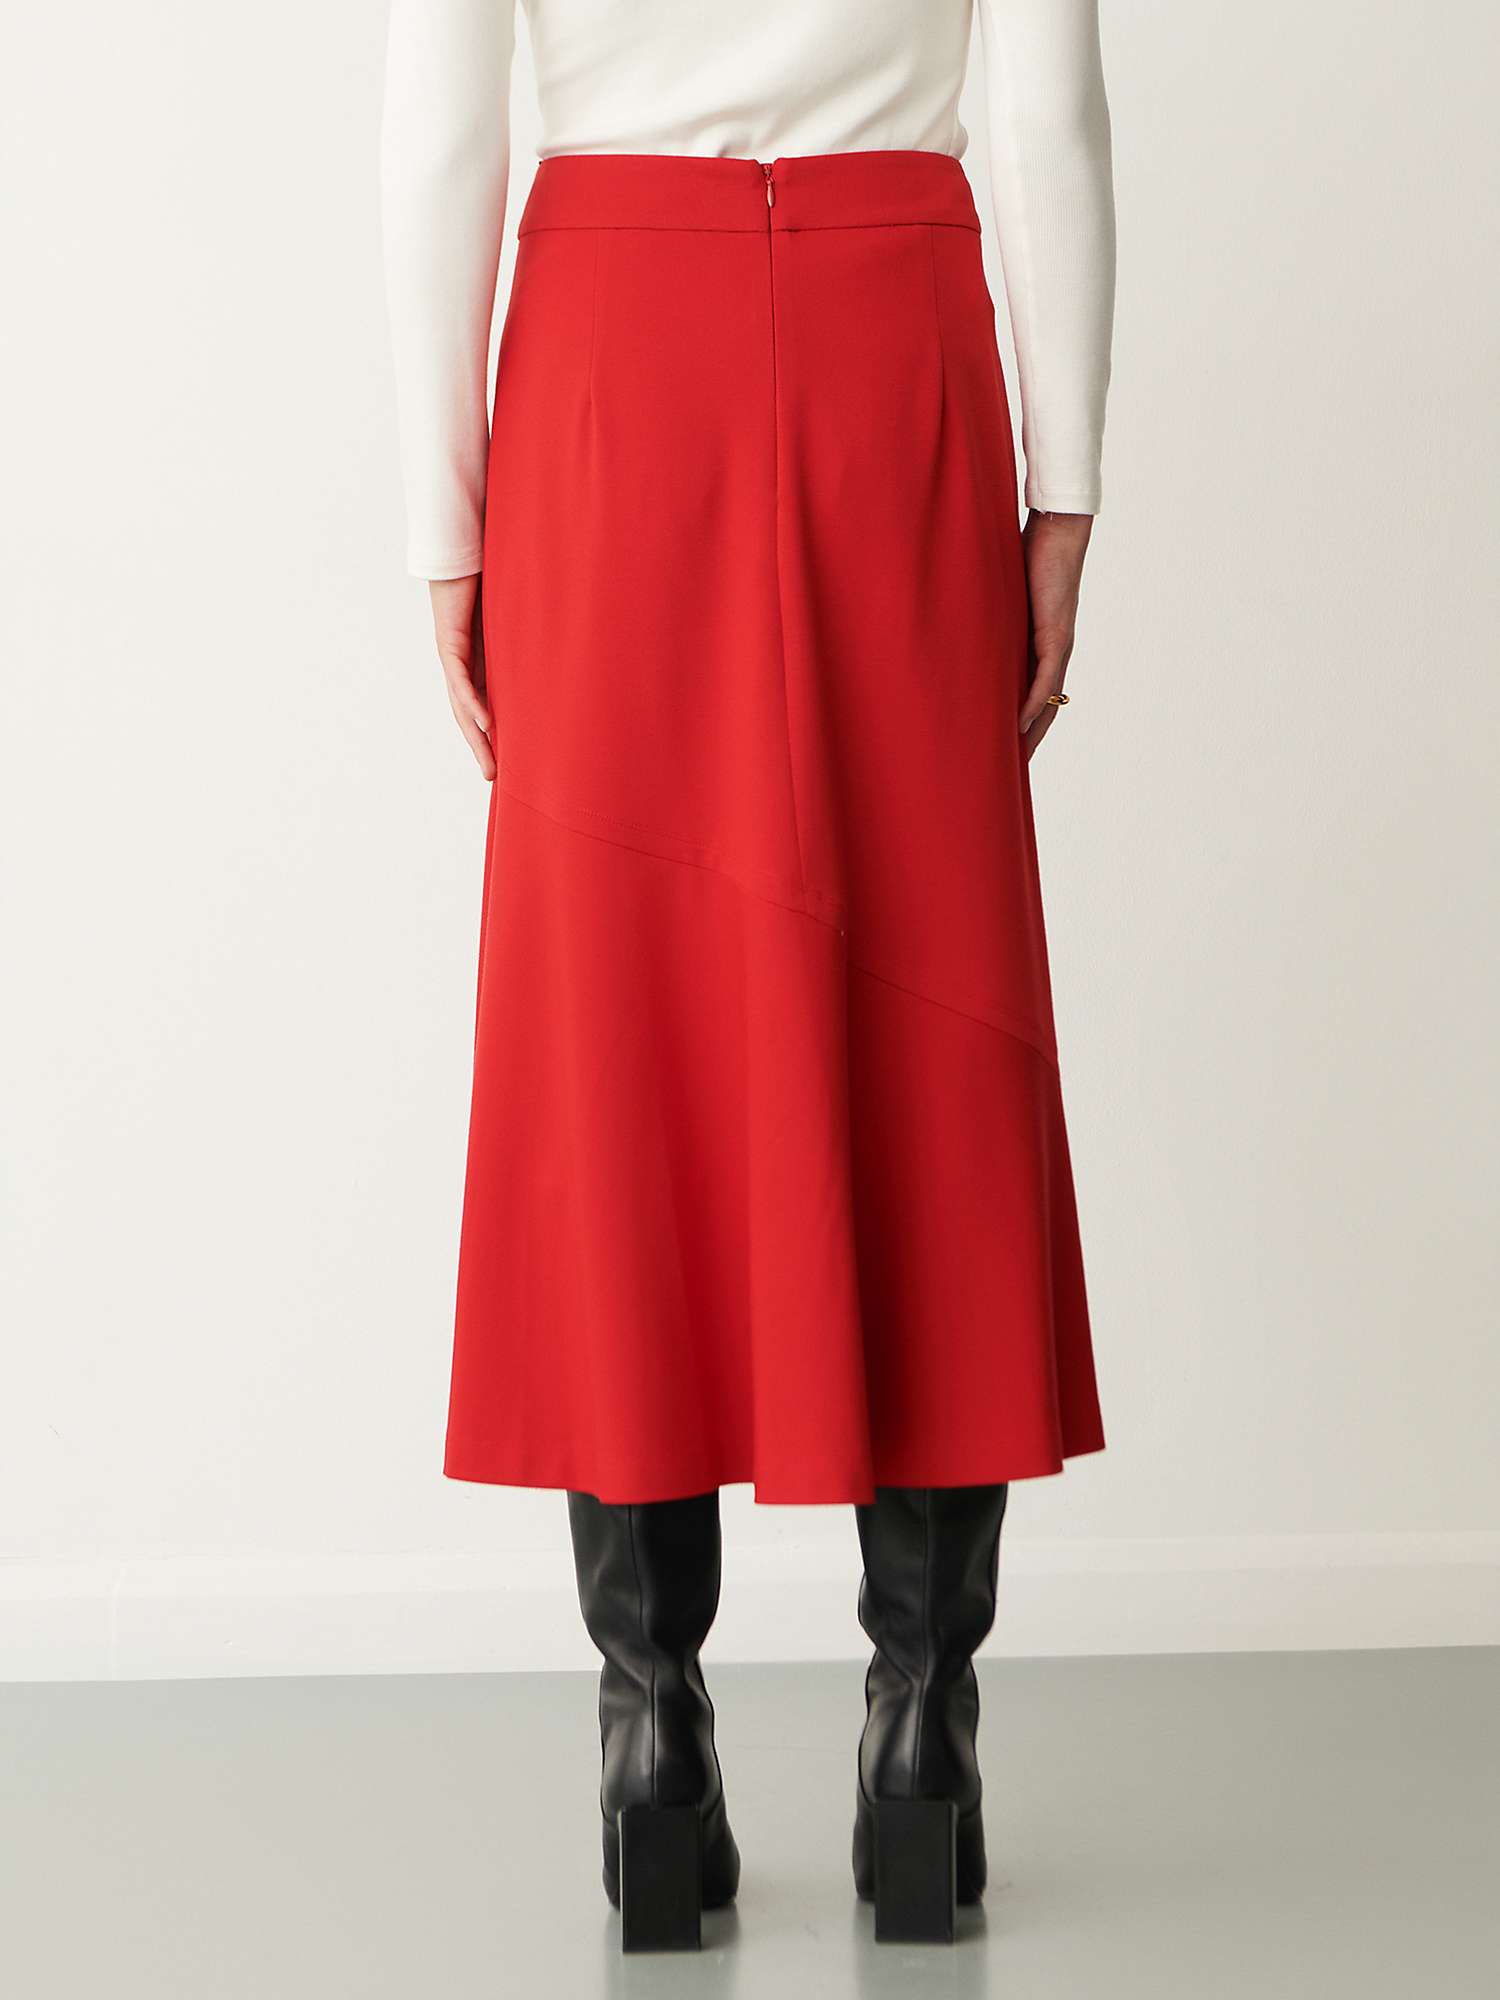 Finery Grace Midi Skirt, Red at John Lewis & Partners